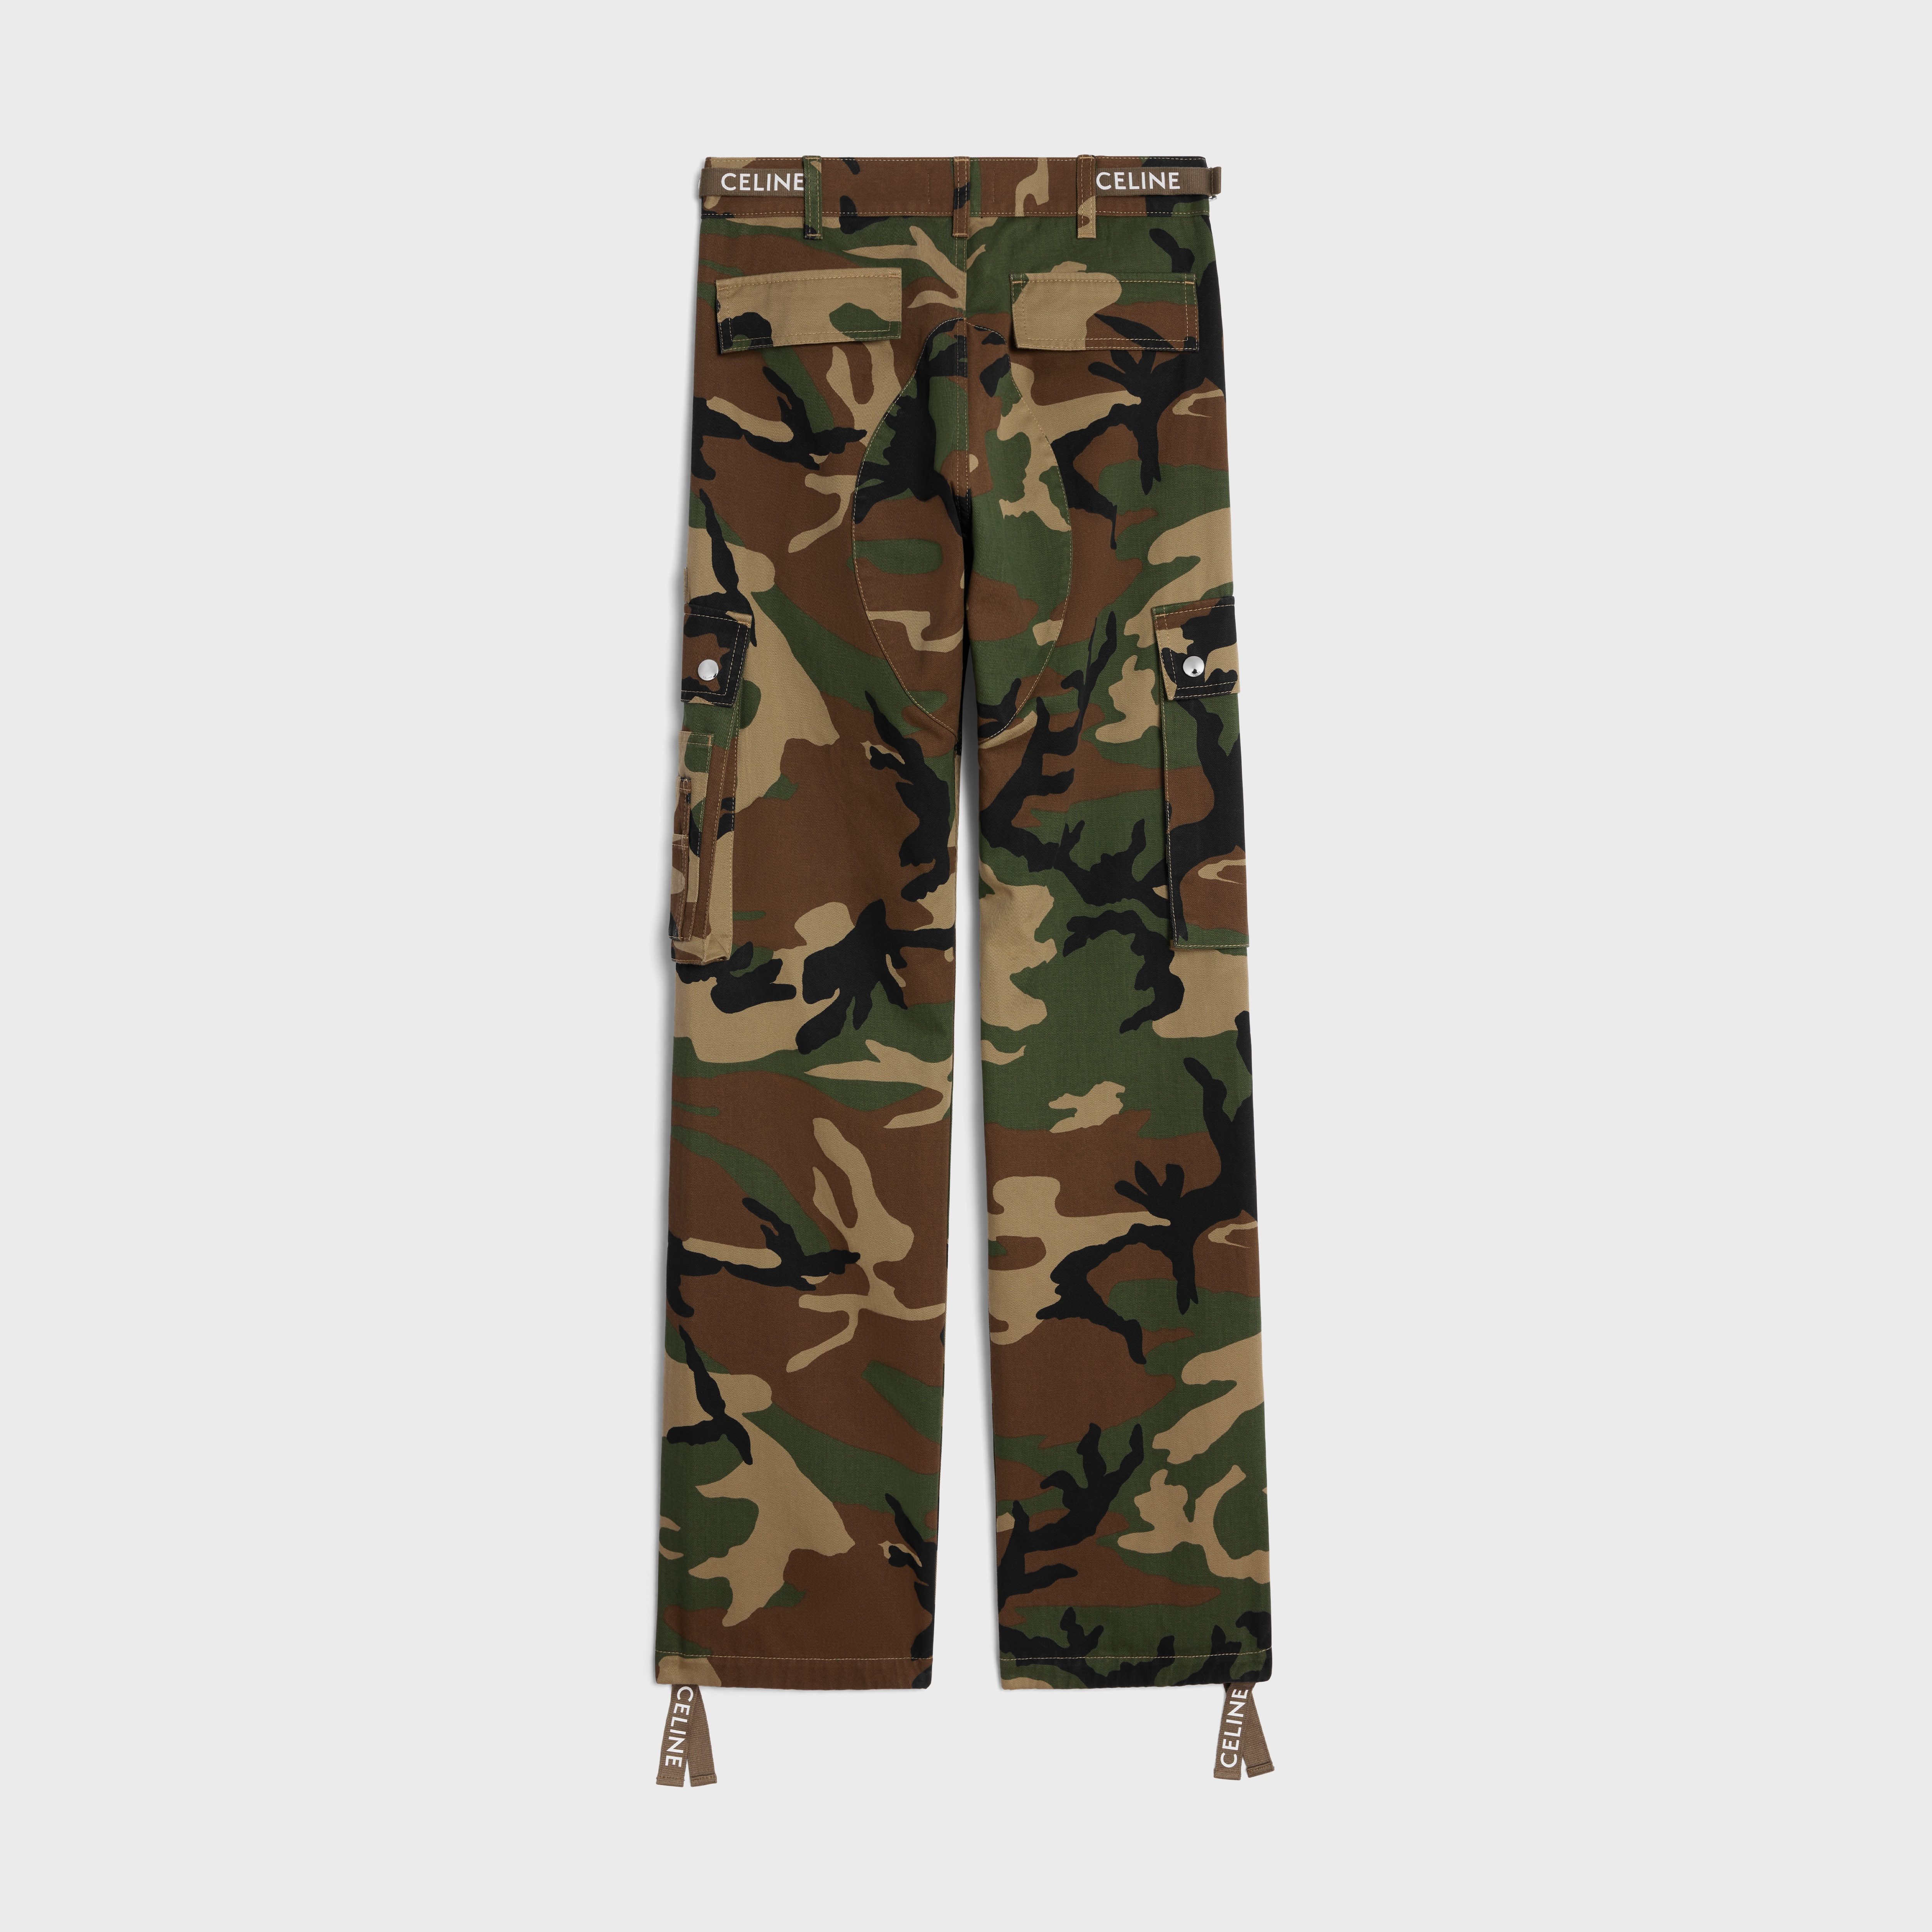 celine cargo pants in camouflage cotton - 2